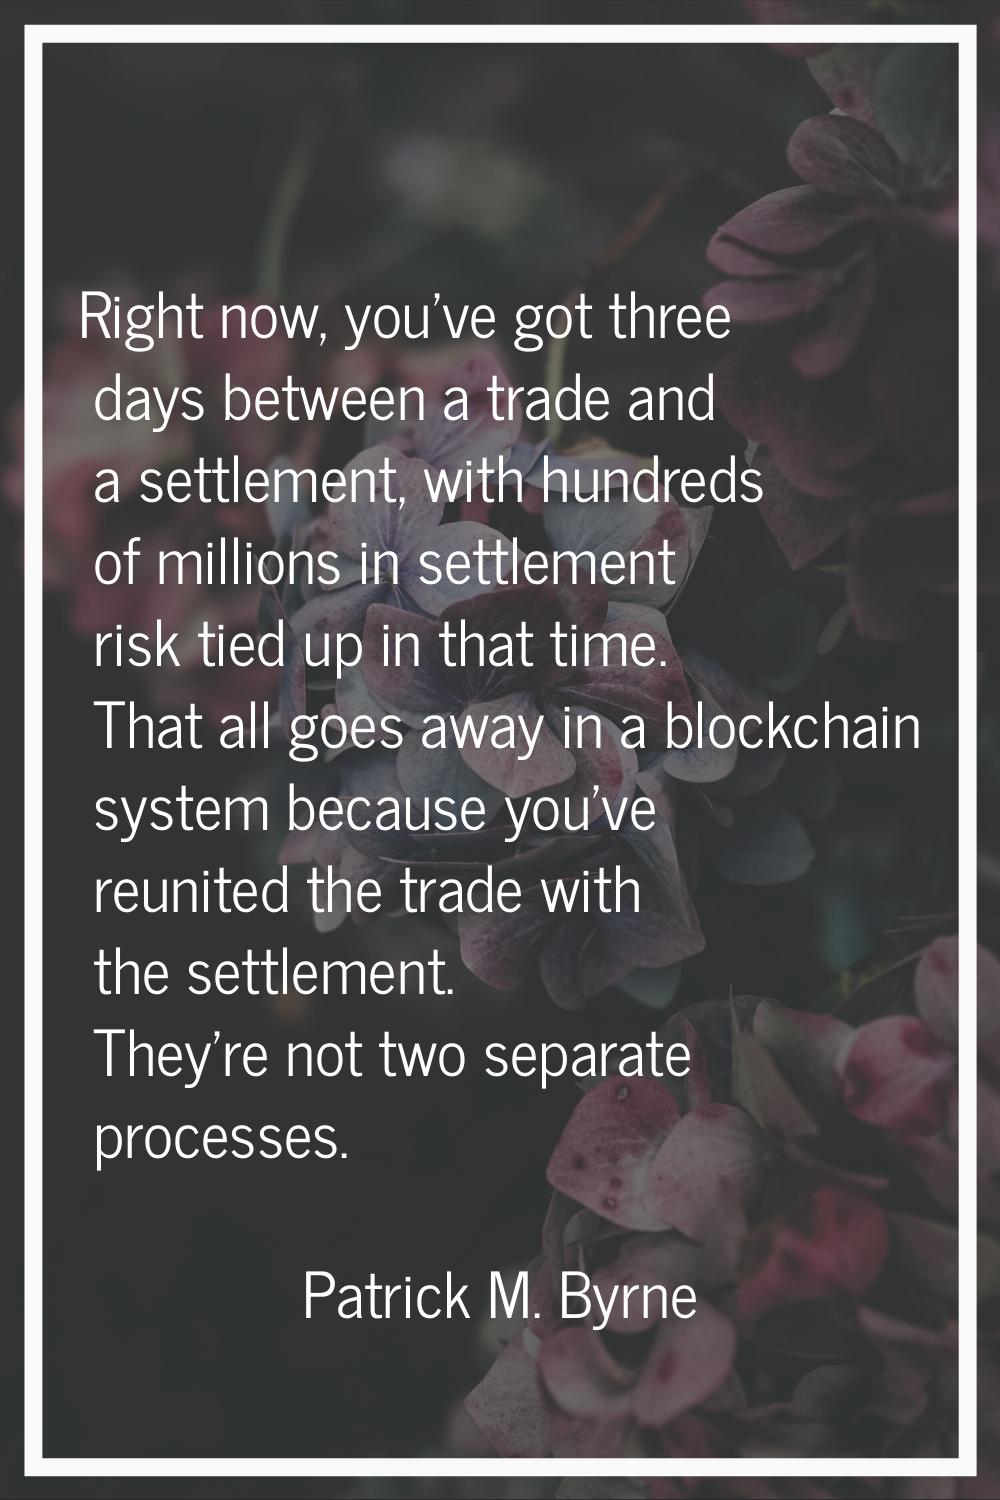 Right now, you've got three days between a trade and a settlement, with hundreds of millions in set